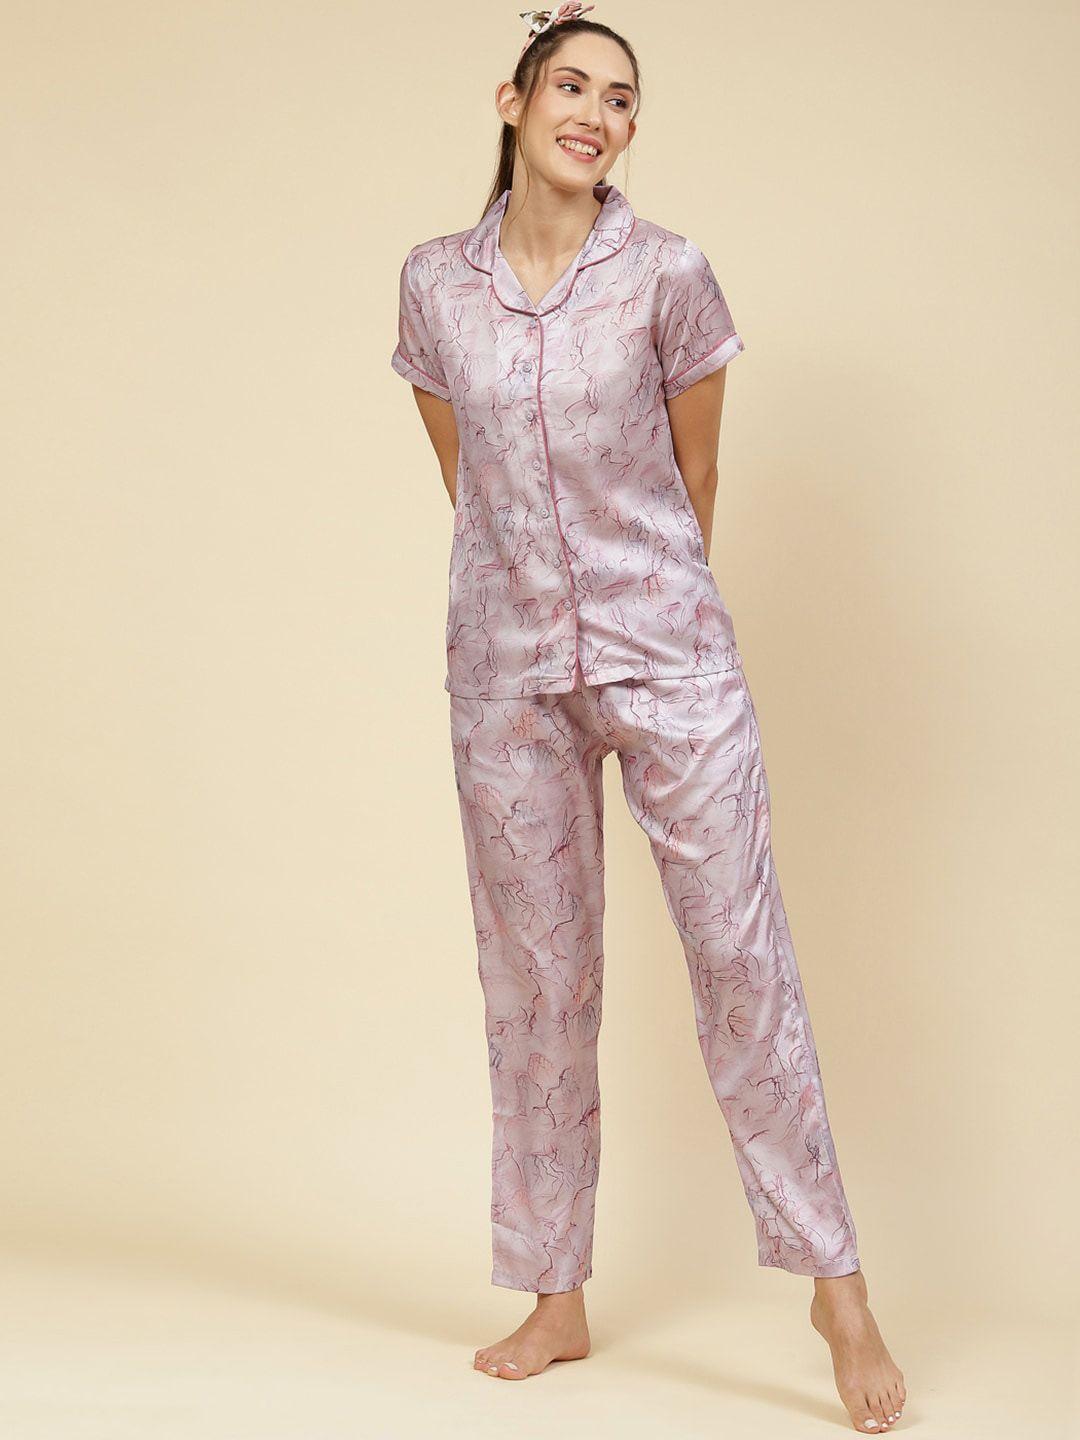 monte carlo abstract printed night suit